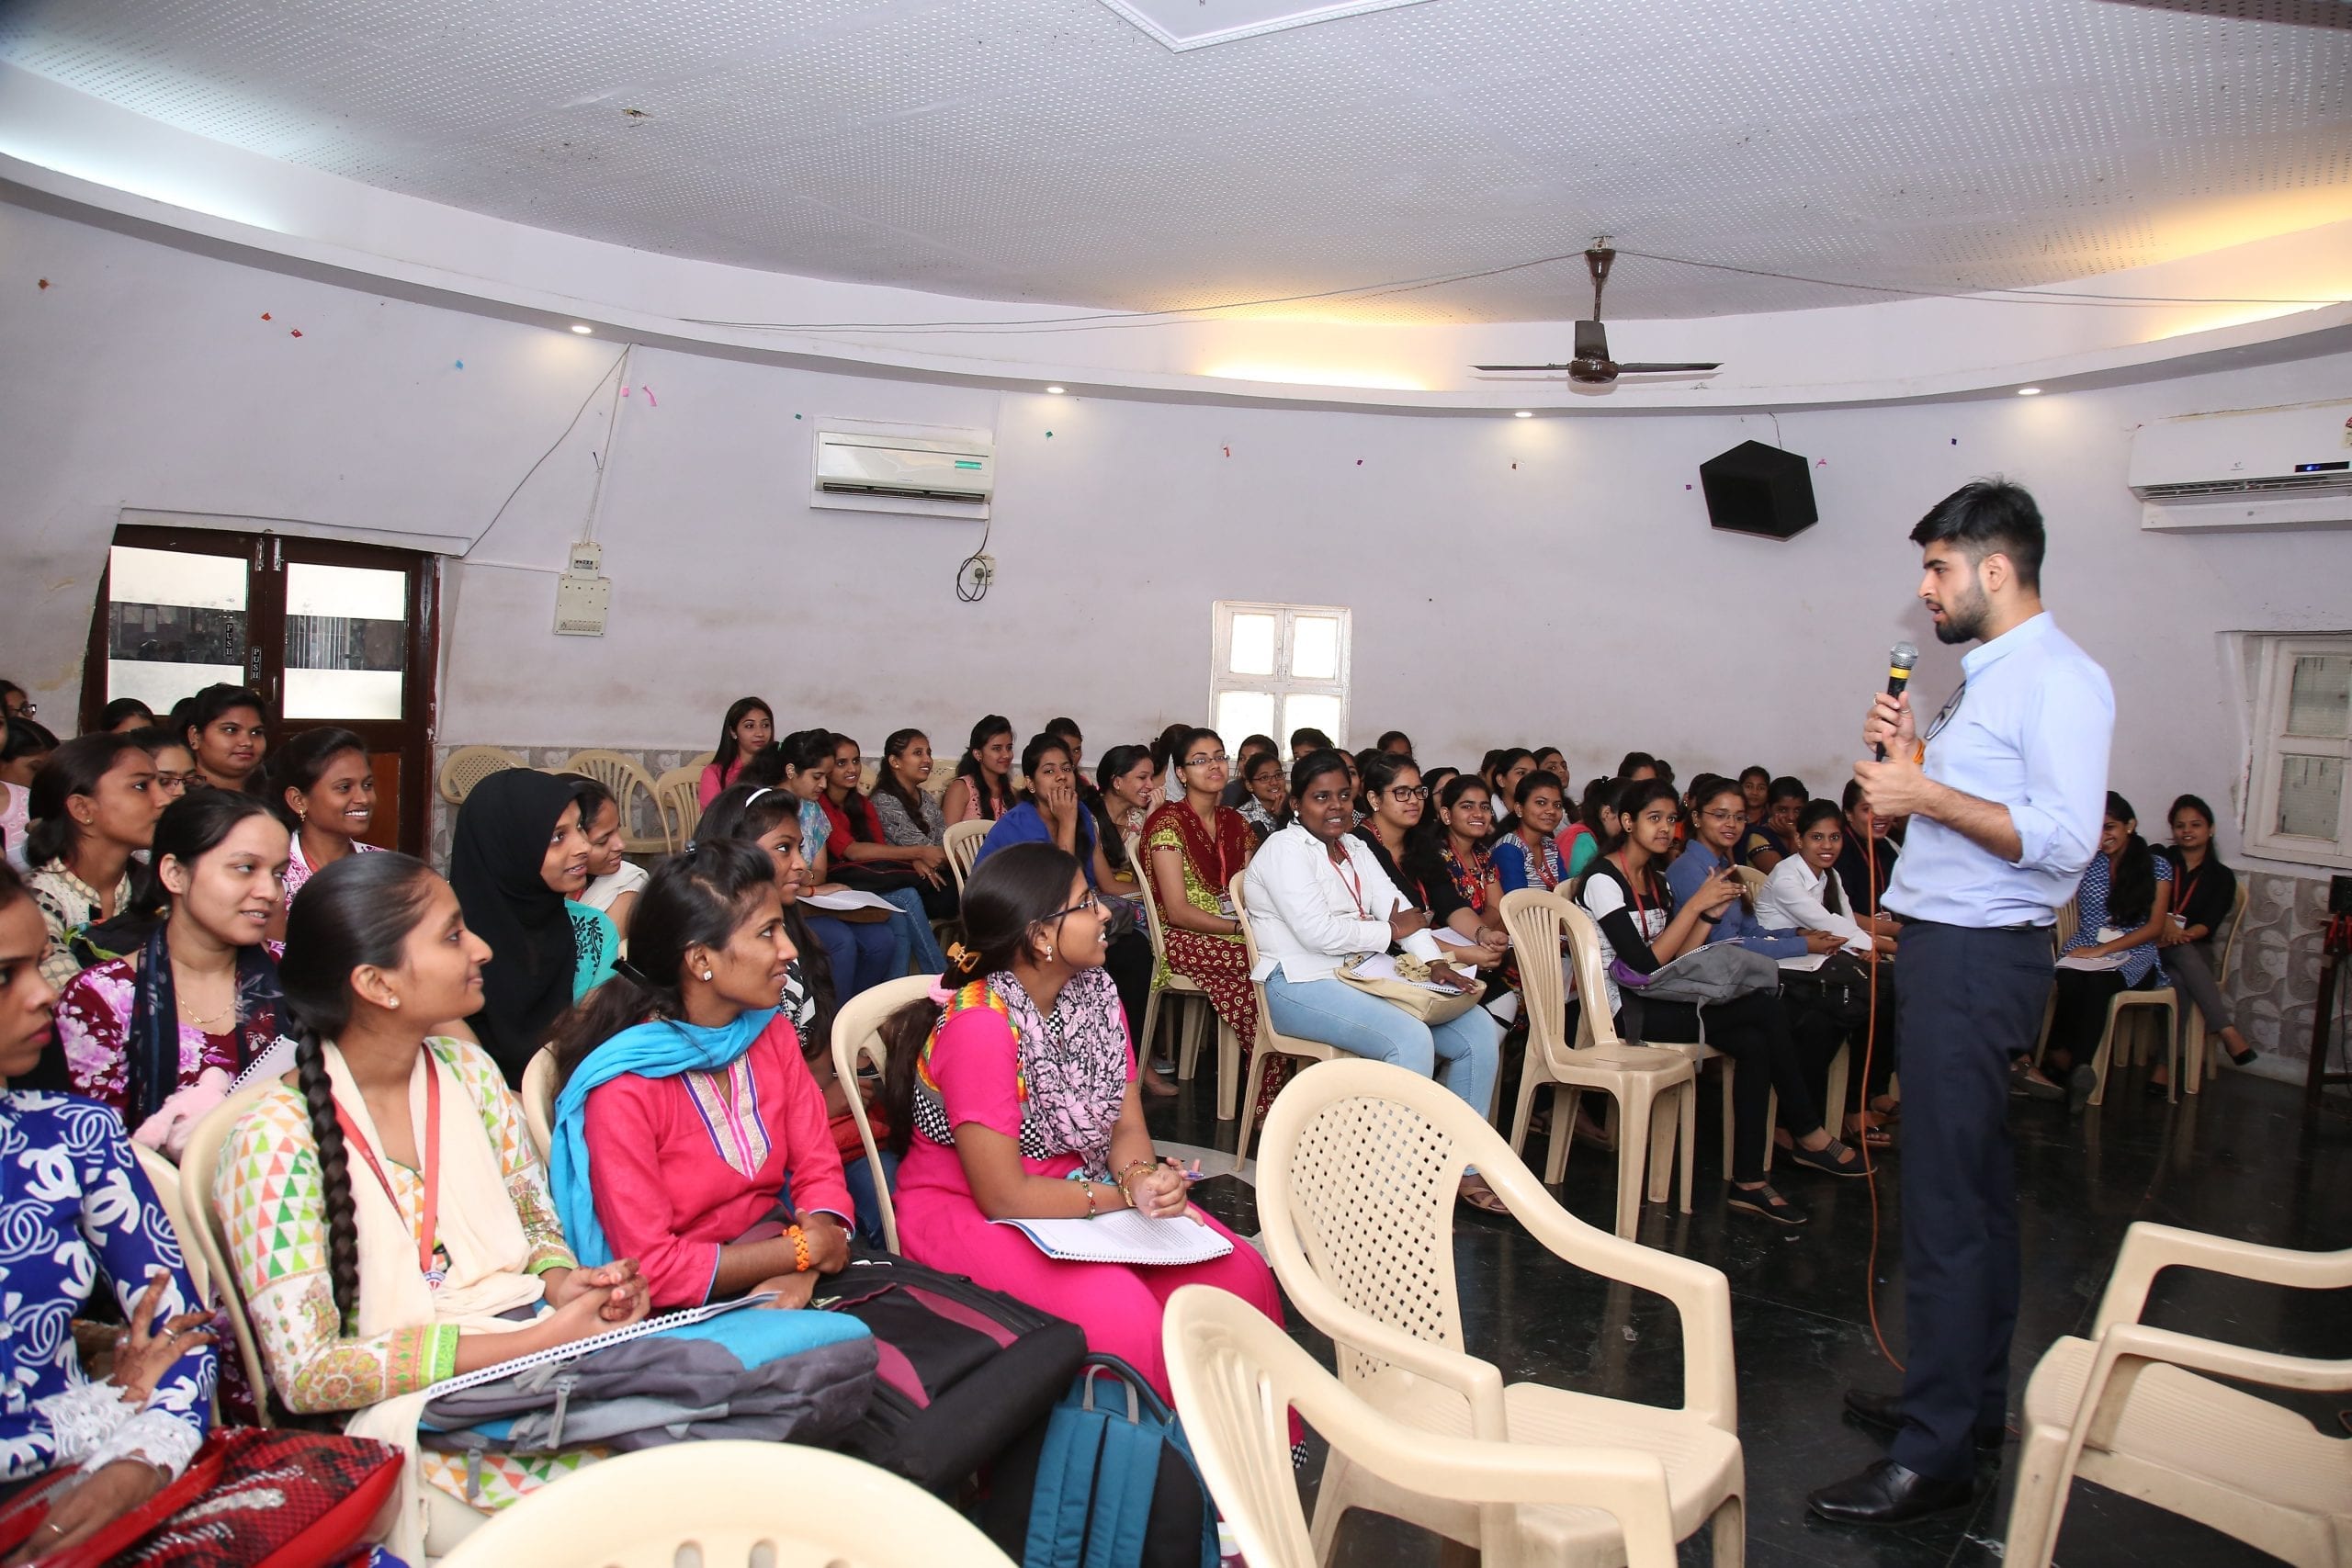 A group of young adults learning about formal work opportunities at a workshop in India